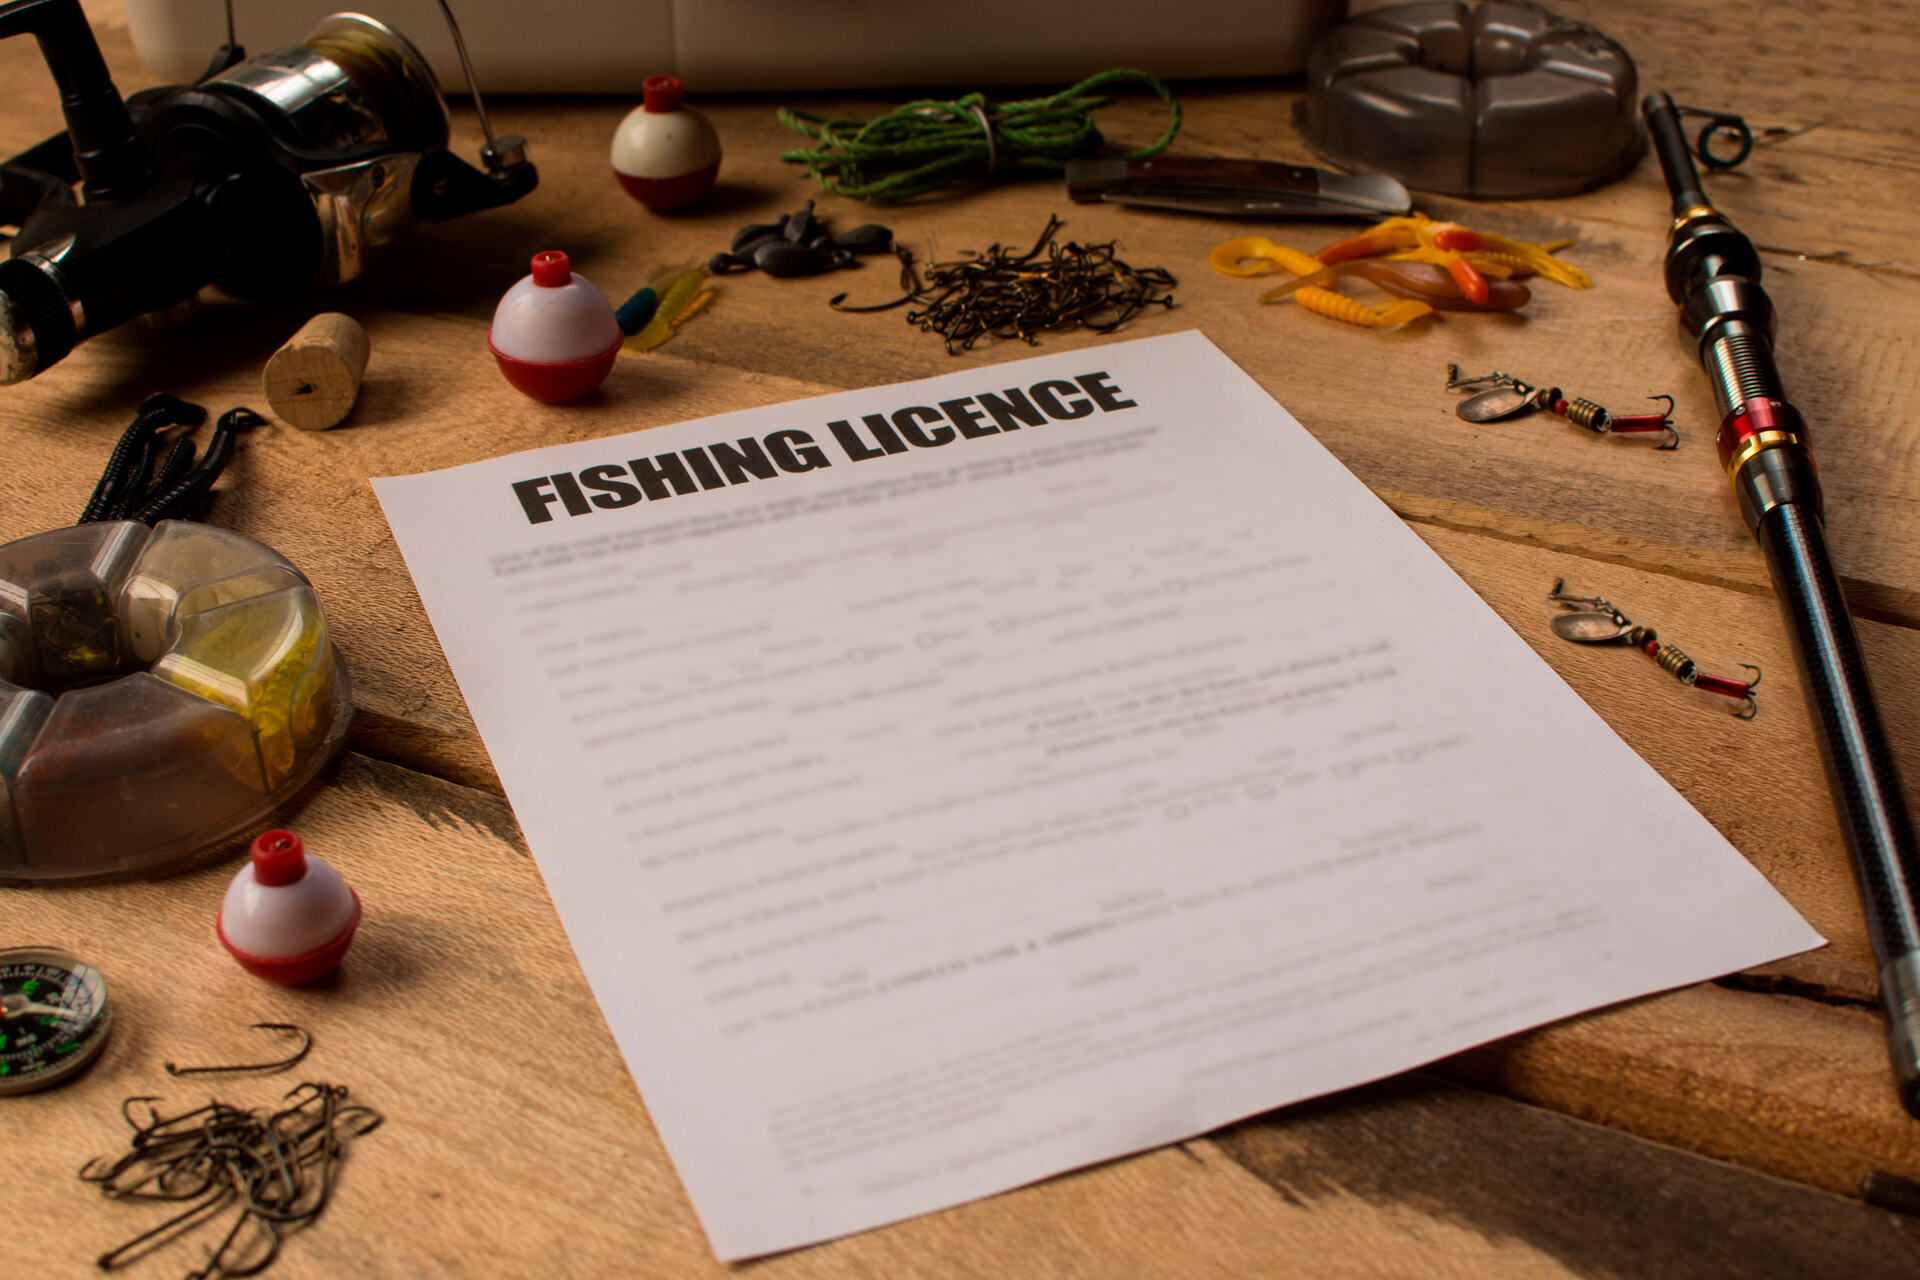 license and permission to fish.